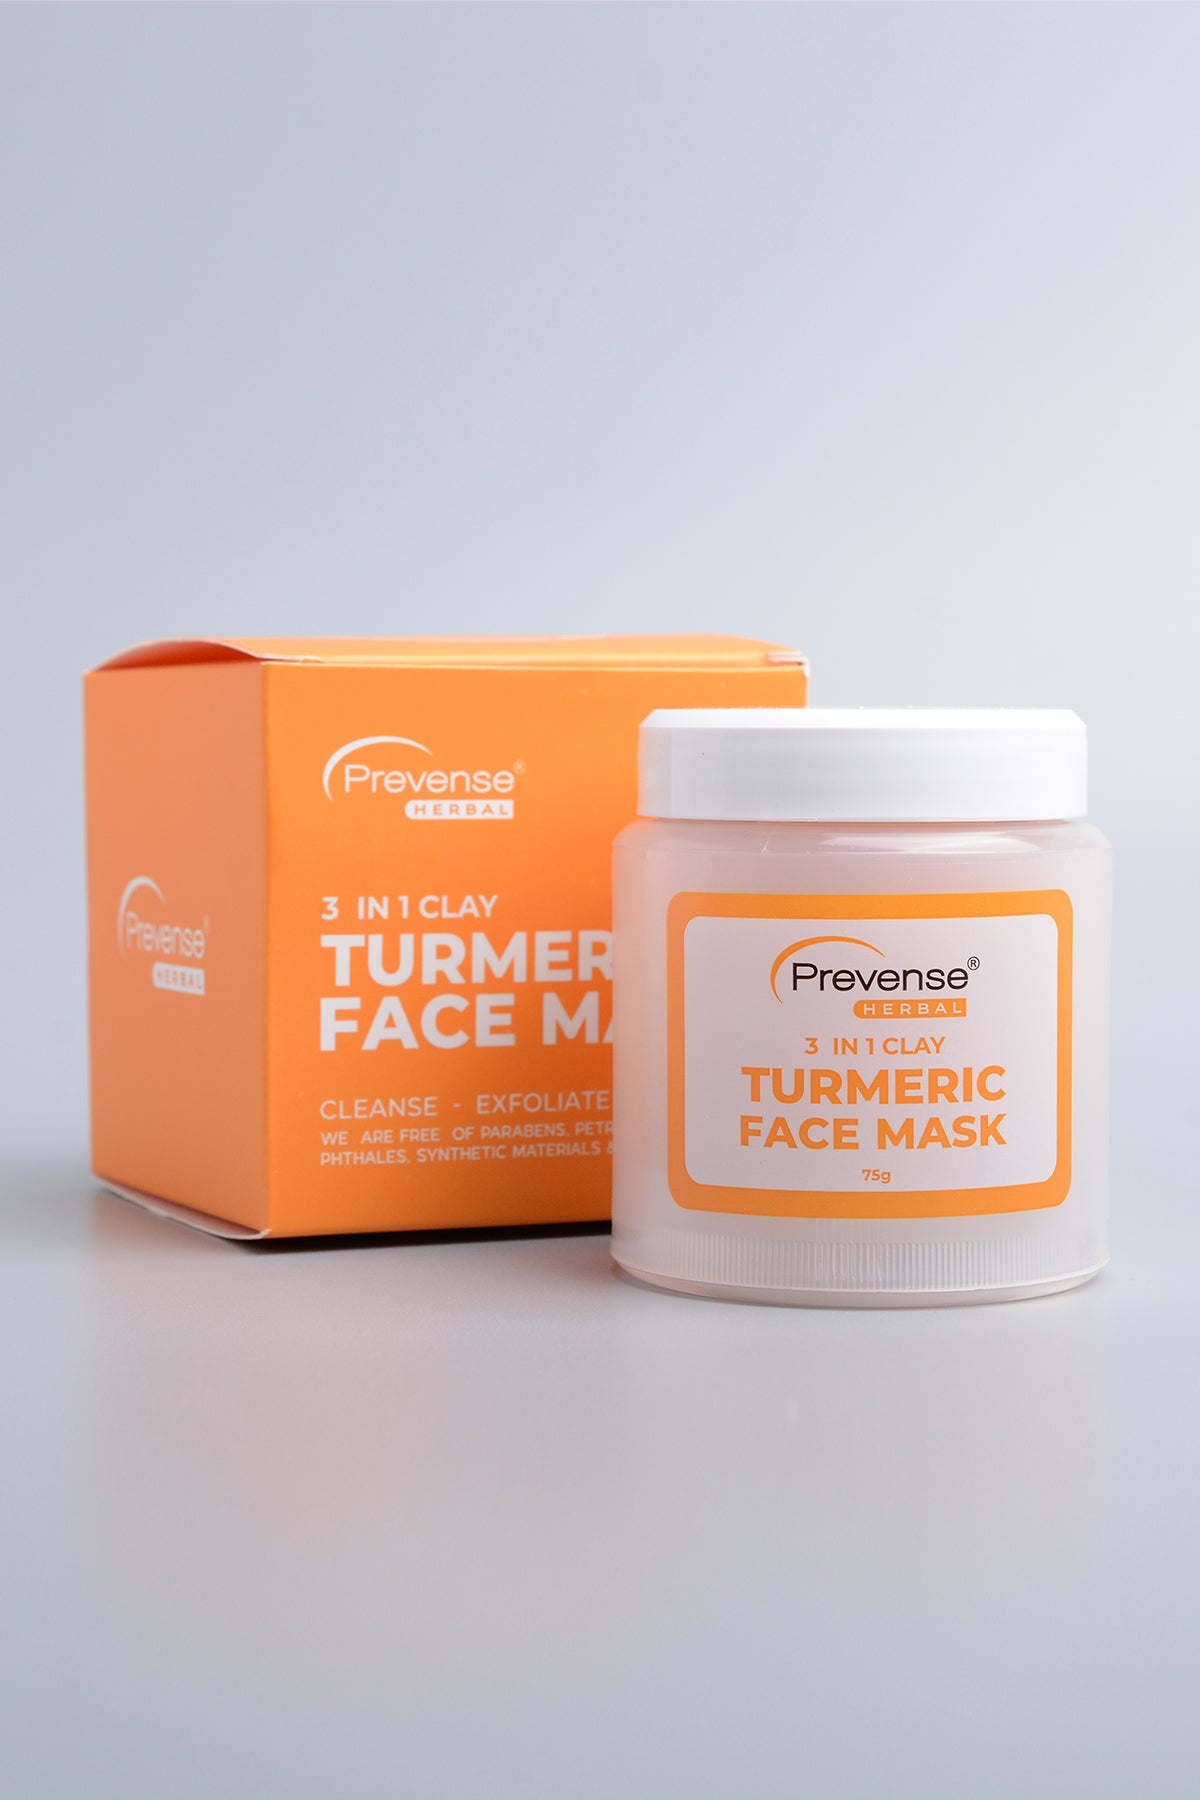 Prevense 3 in 1 Clay Turmeric Face Mask (75 g)